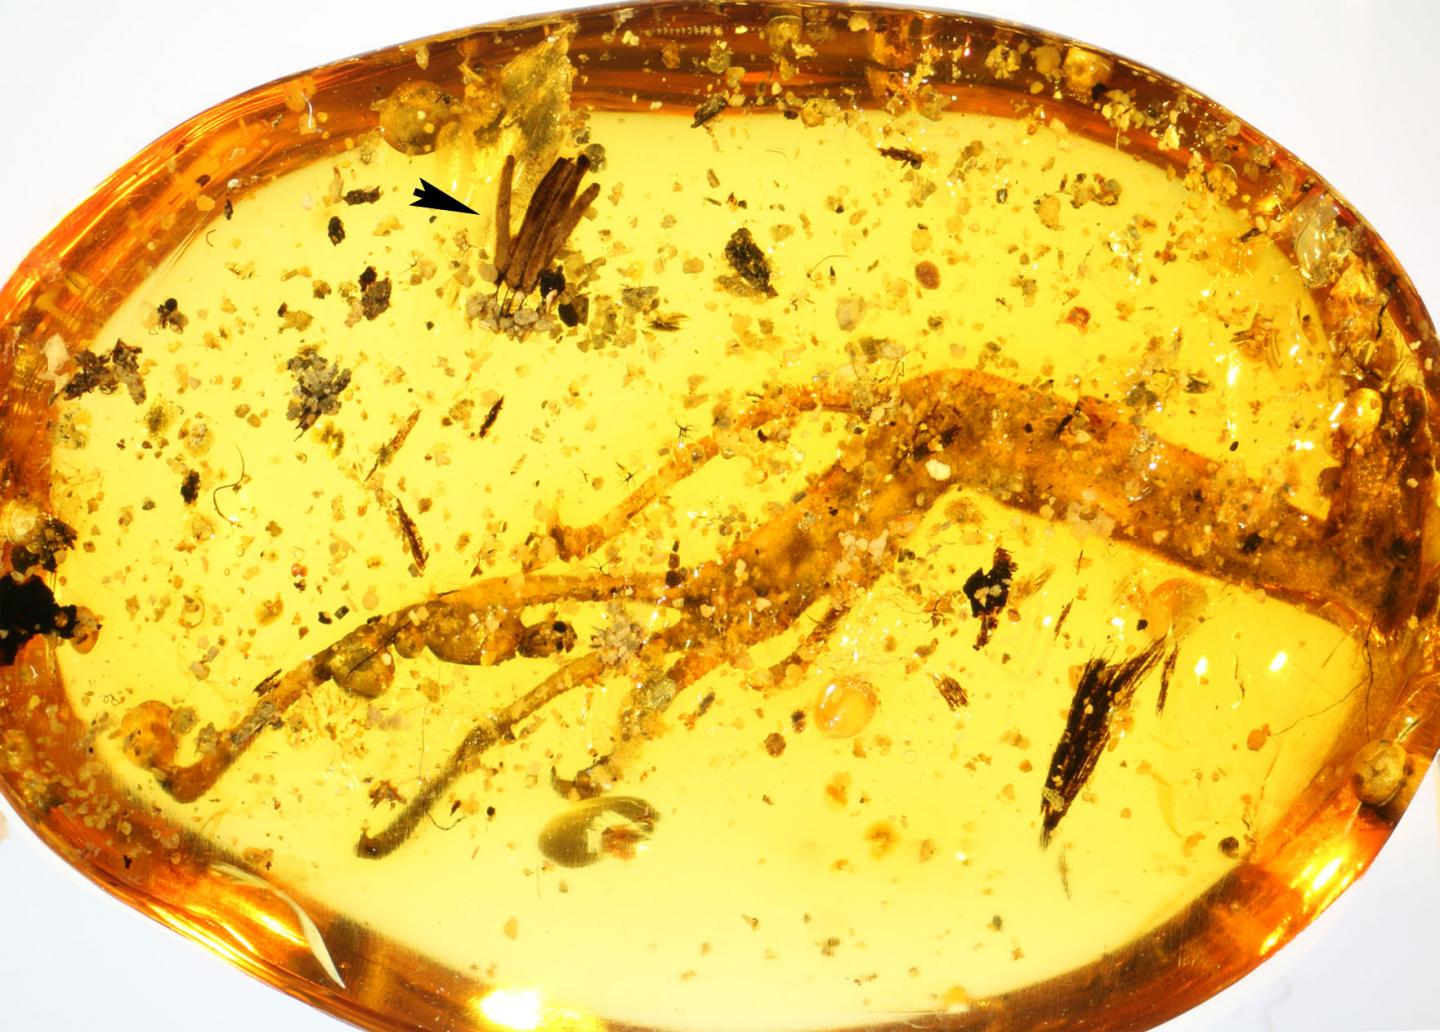 Bright Yellow Piece of Amber with Trapped Creatures/Plants